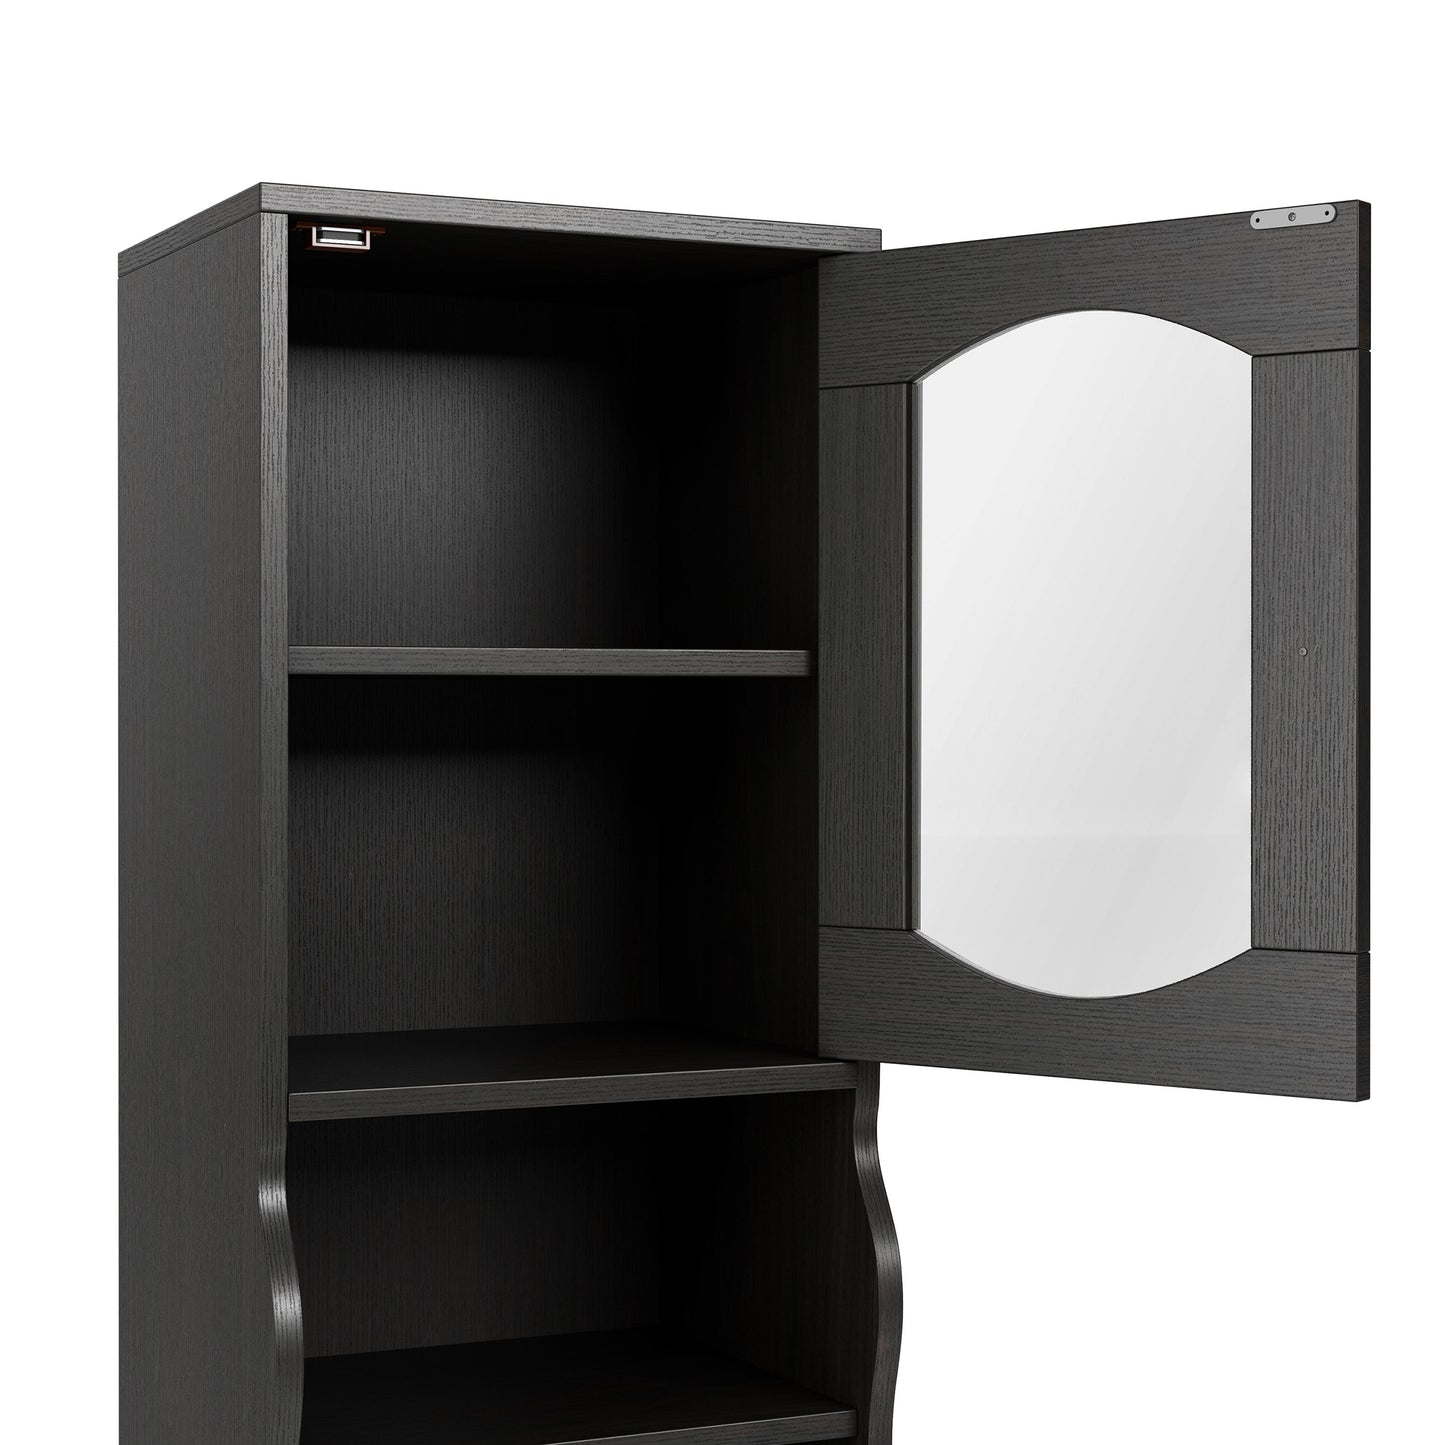 Right angled close-up upper door/shelf view of a transitional espresso two-door tower cabinet with door open on a white background